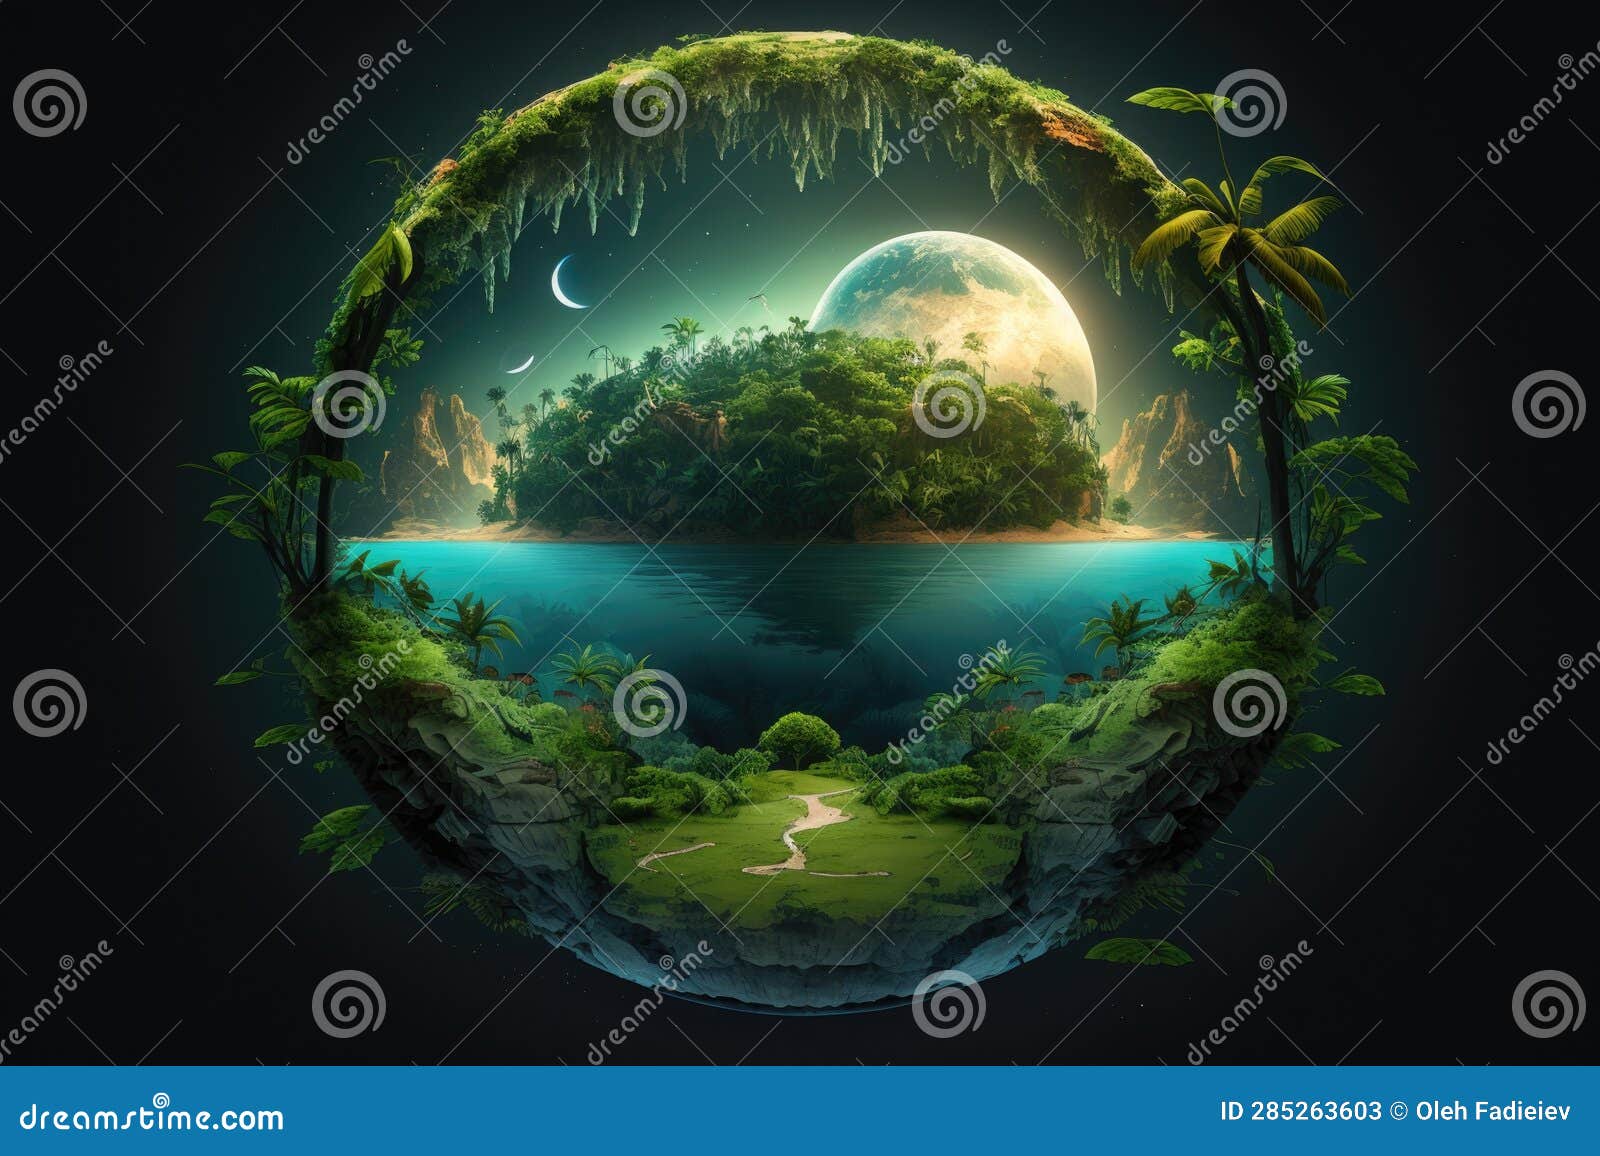 fantasy landscape with planet and forest